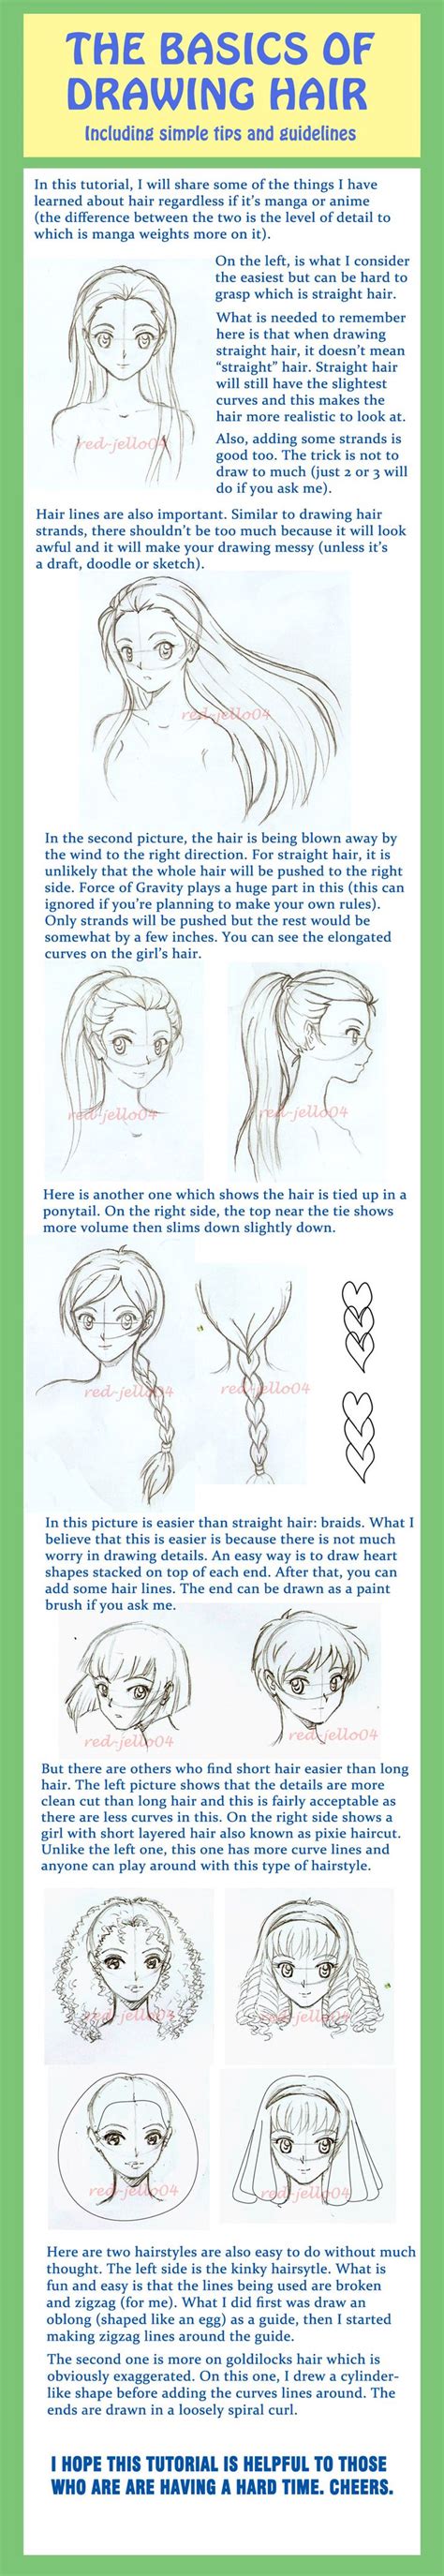 Basic Hair Tutorial By Red Jello04 On Deviantart How To Draw Hair